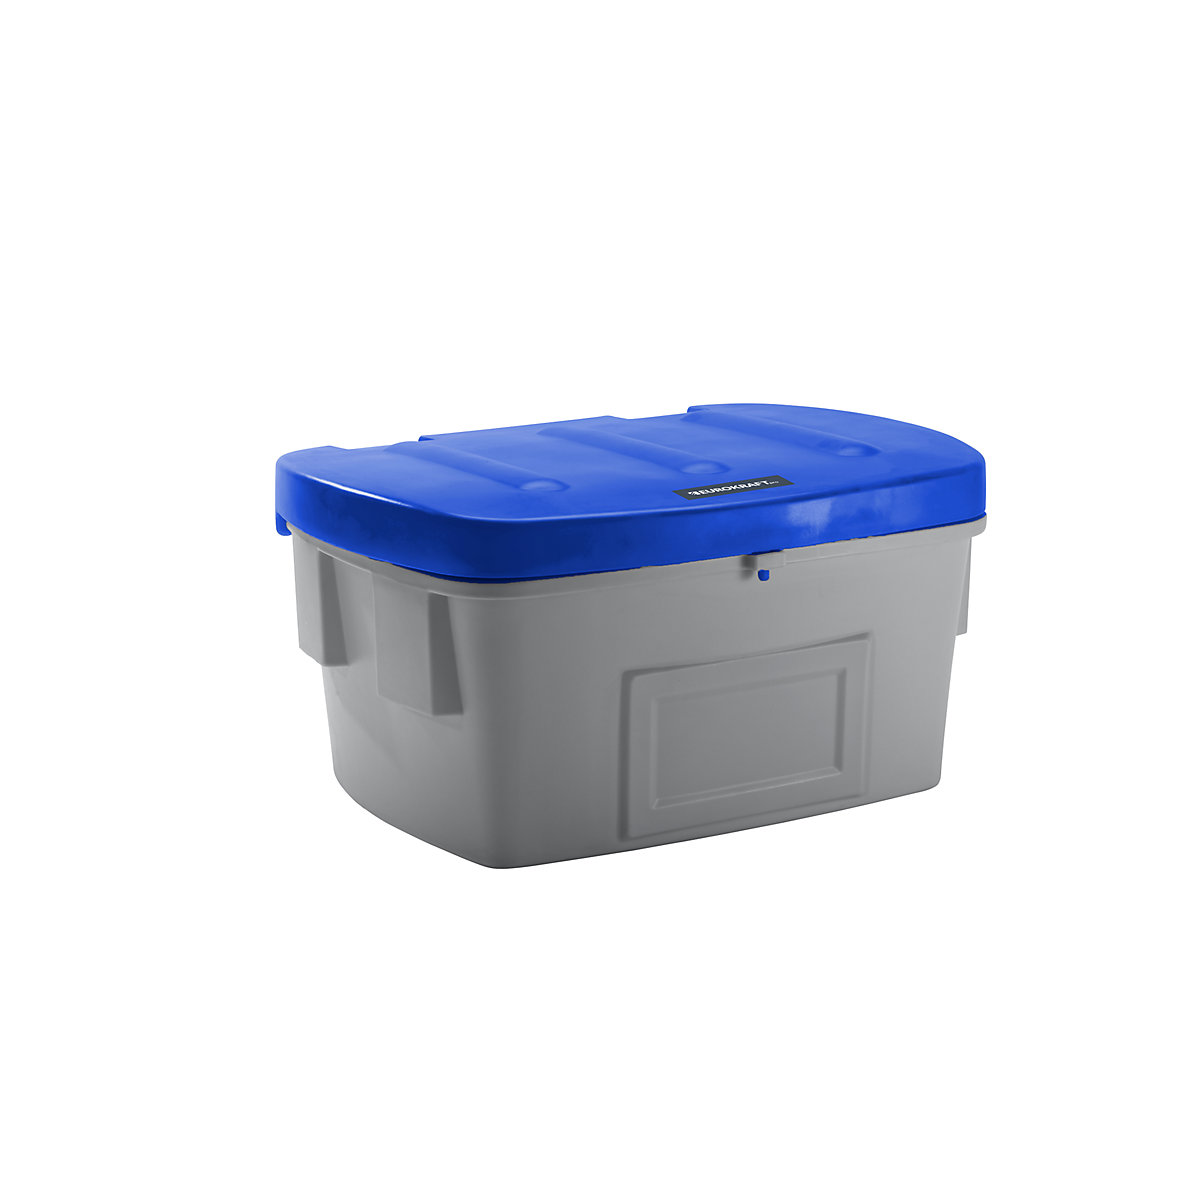 Universal / grit container – eurokraft pro, without dispenser opening, 550 l, blue lid-5